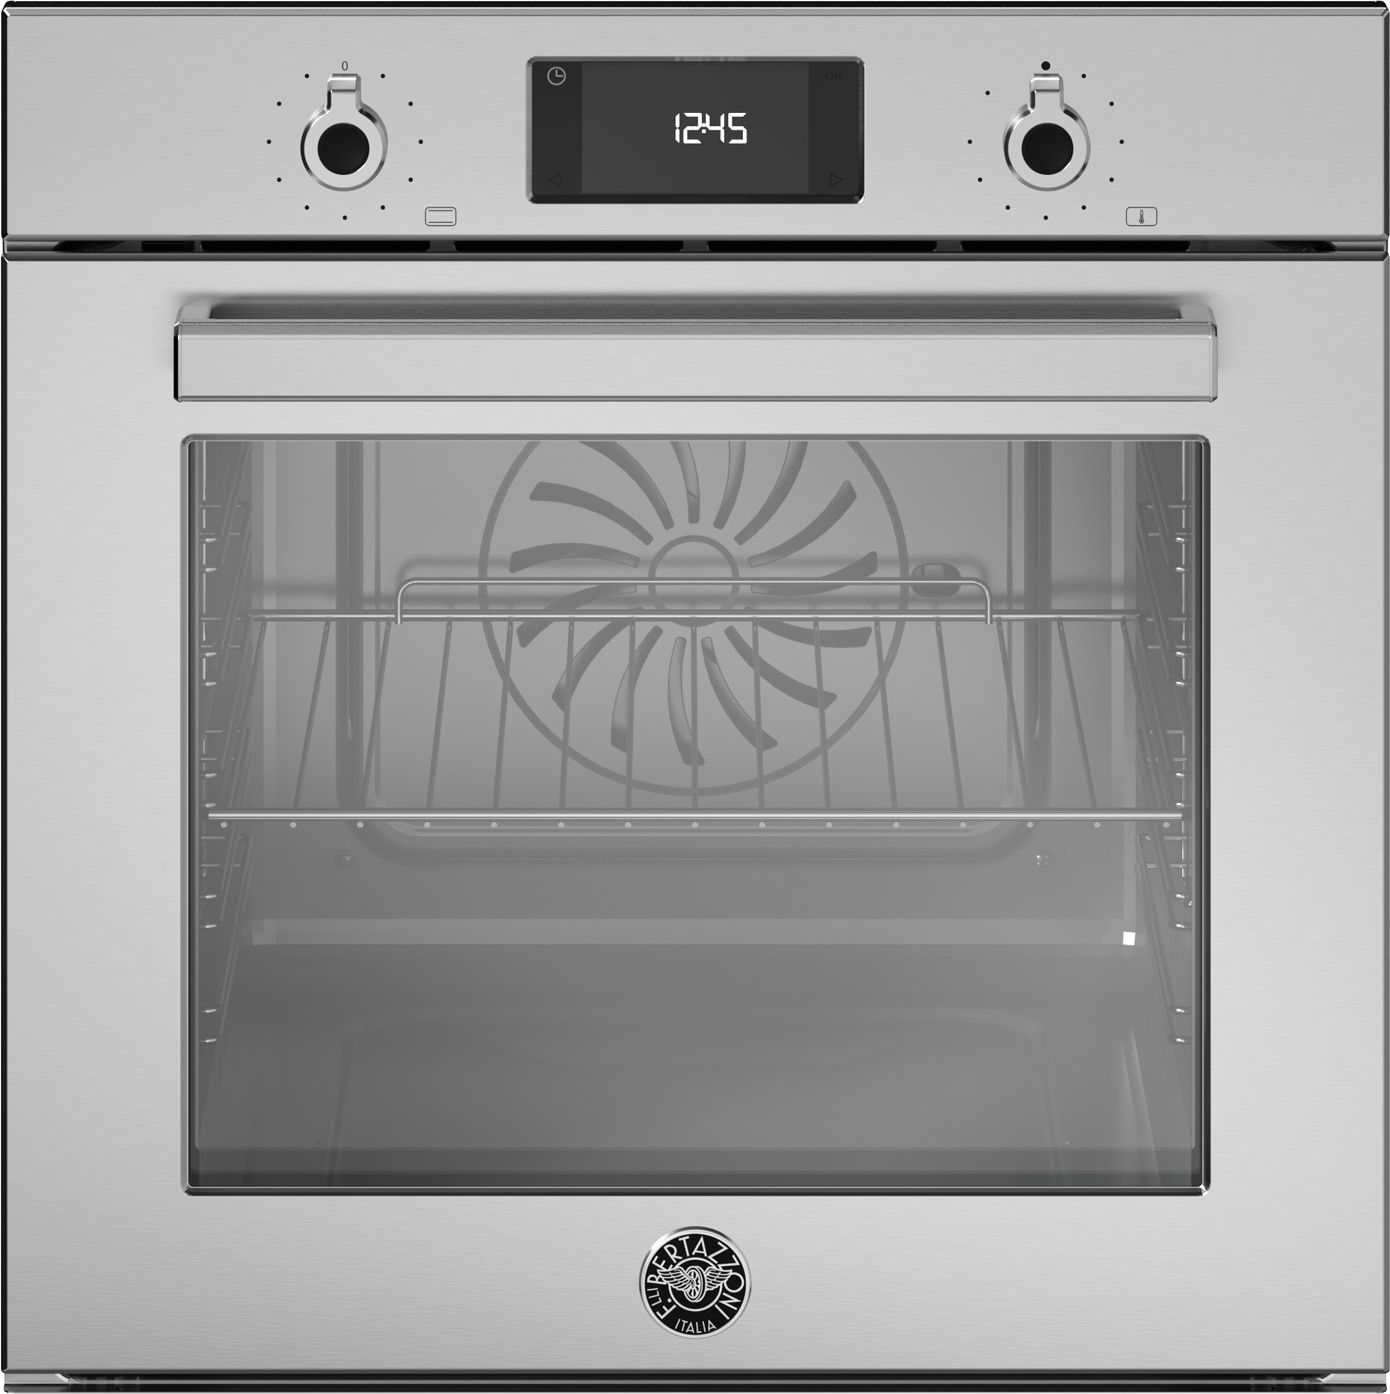 Bertazzoni Professional Series F6011PROELX Built In Electric Single Oven - Stainless Steel - A++ Rated, Stainless Steel